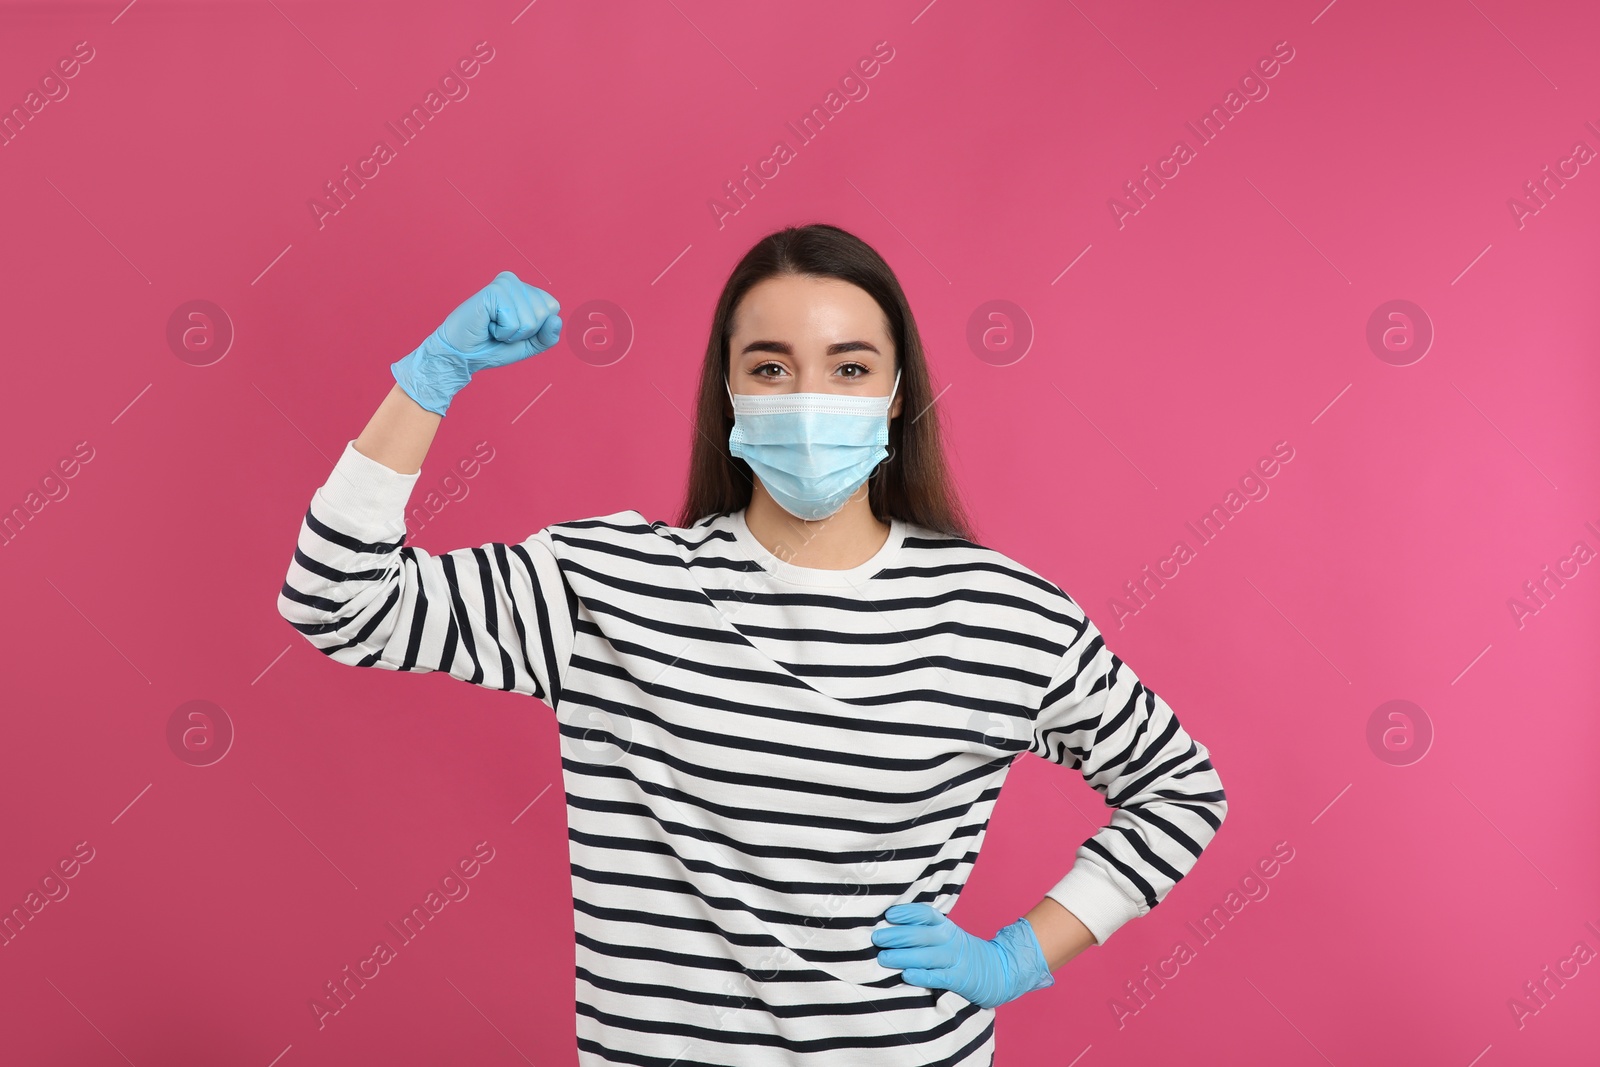 Photo of Woman with protective mask and gloves showing muscles on pink background. Strong immunity concept